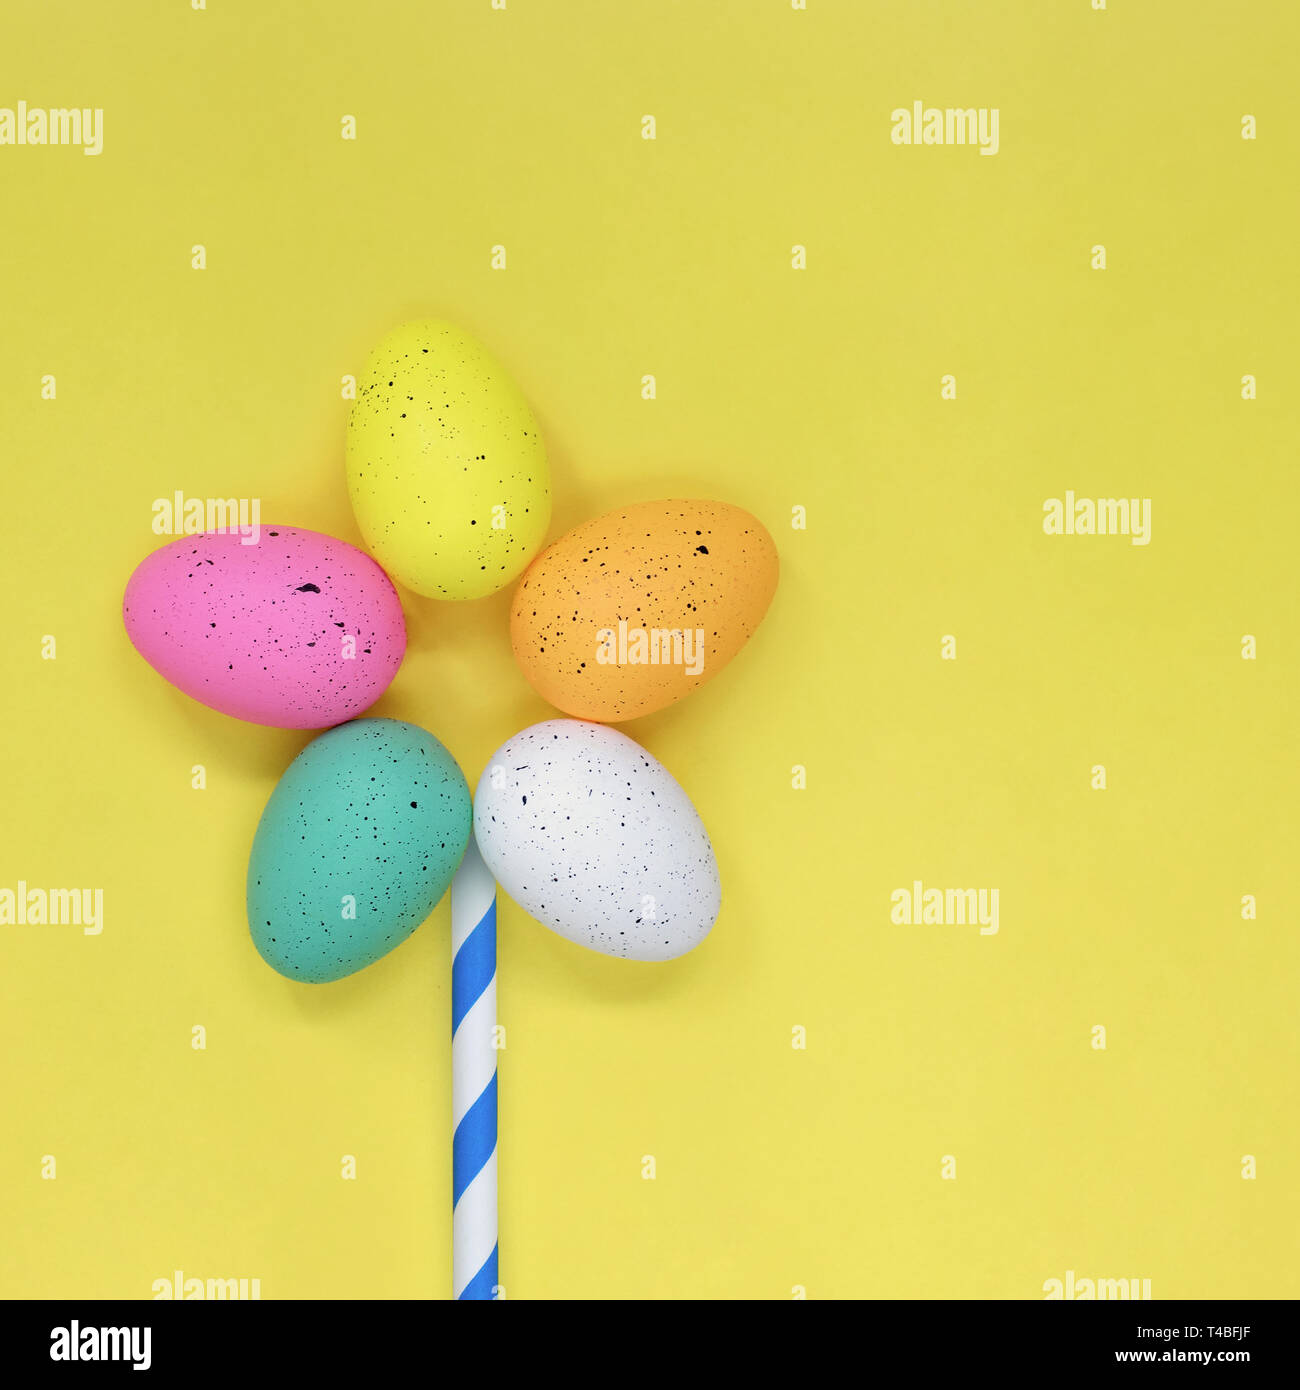 Flower made of colourful Easter eggs, against a yellow background Stock Photo